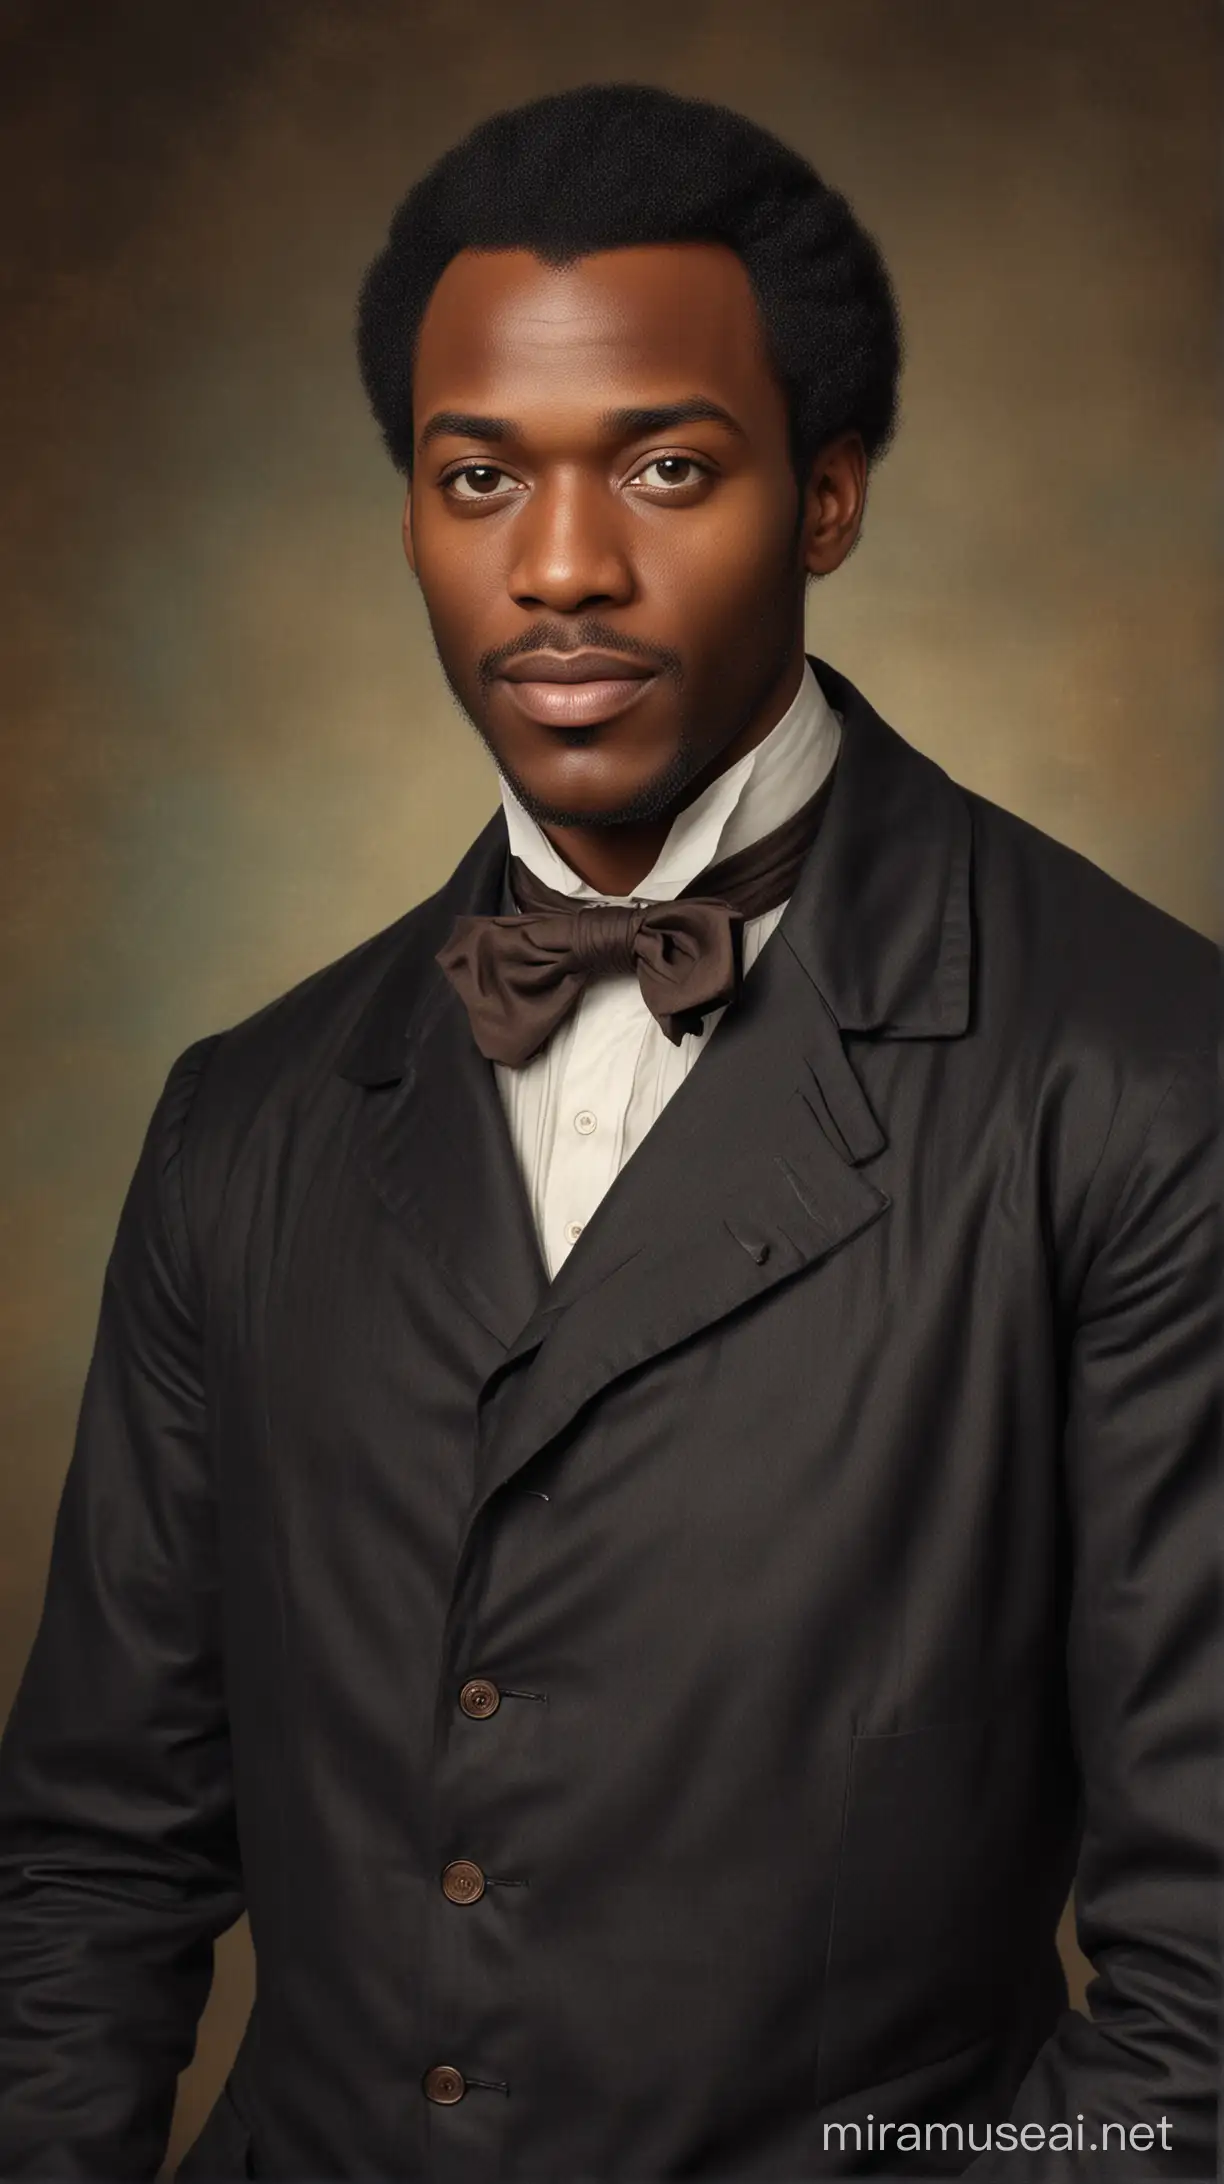 create a photorealistic vintage style image of James McCune Smith, a black doctor
 in the 1850s.